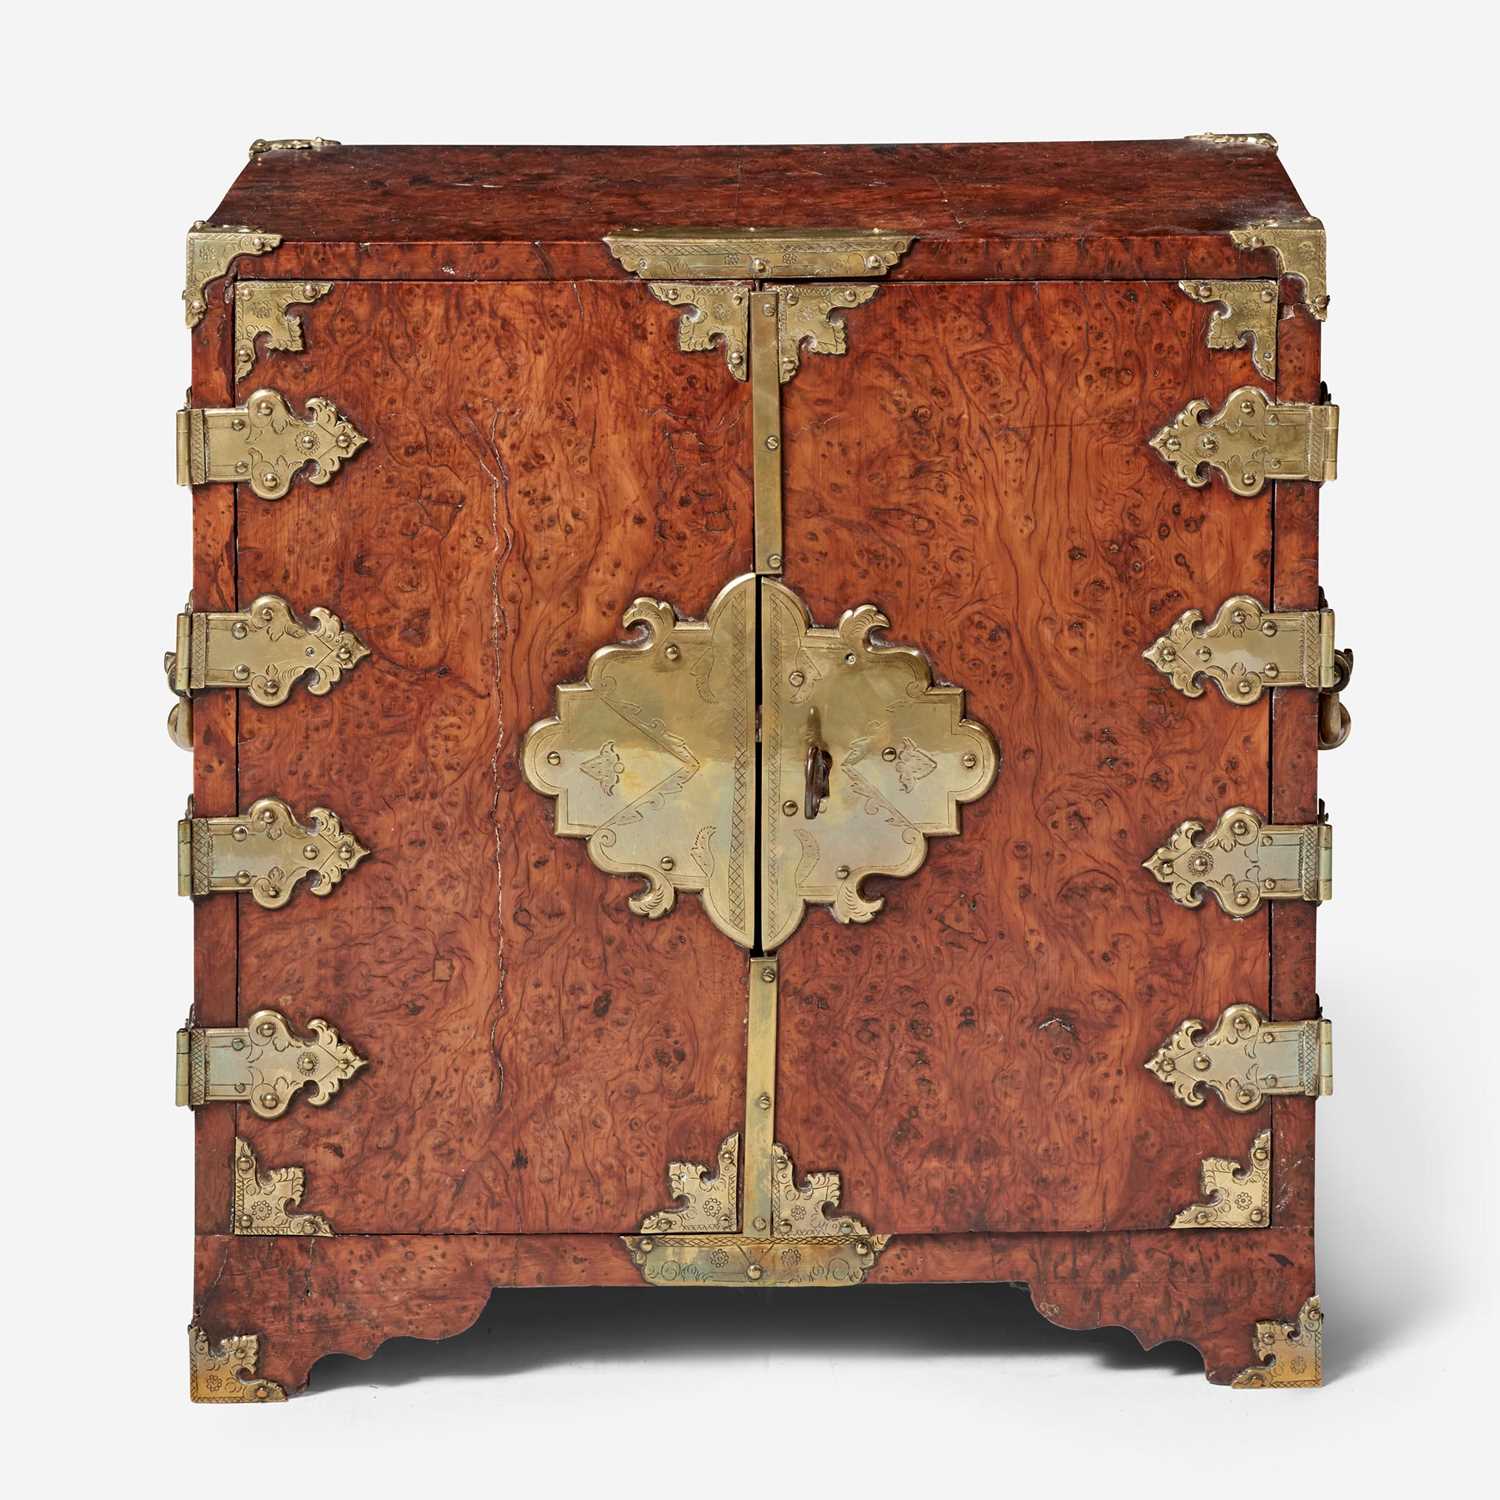 Lot 6 - A Queen Anne brass-mounted burl yew table cabinet